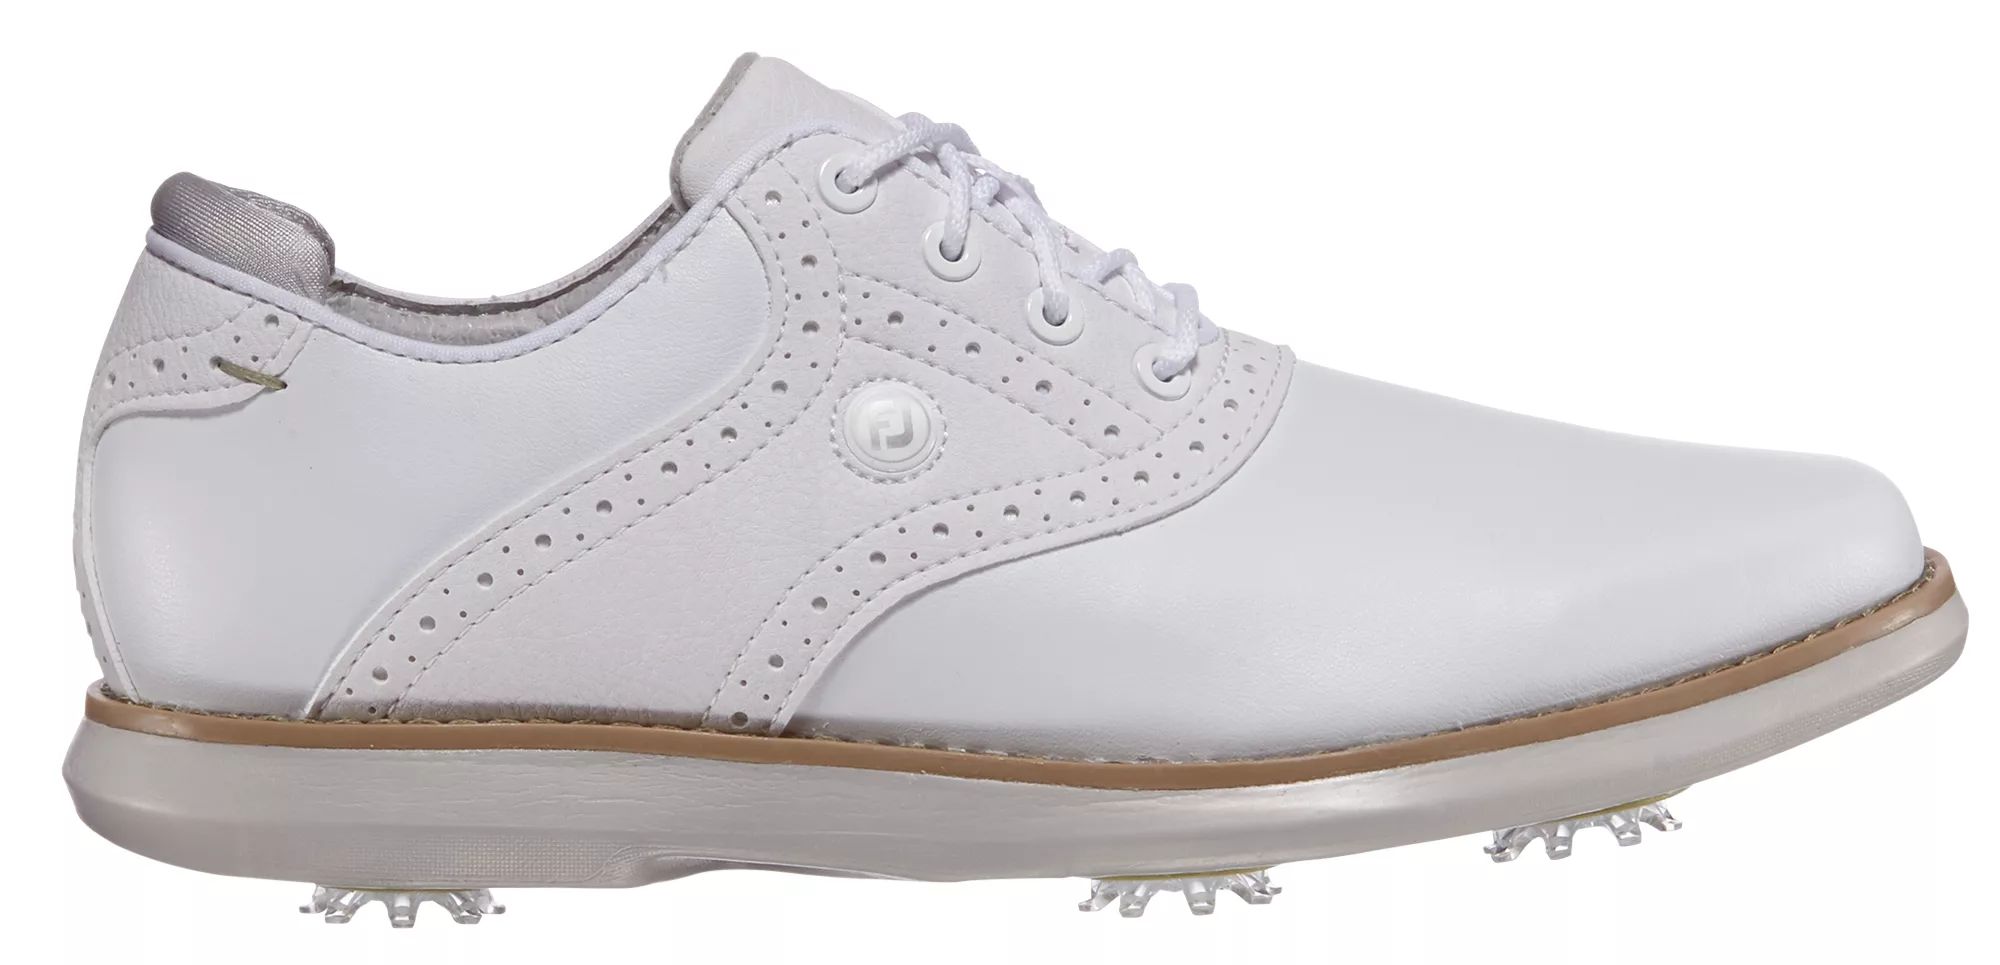 FootJoy Women's Traditions 21 Golf Shoes, White | Dick's Sporting Goods